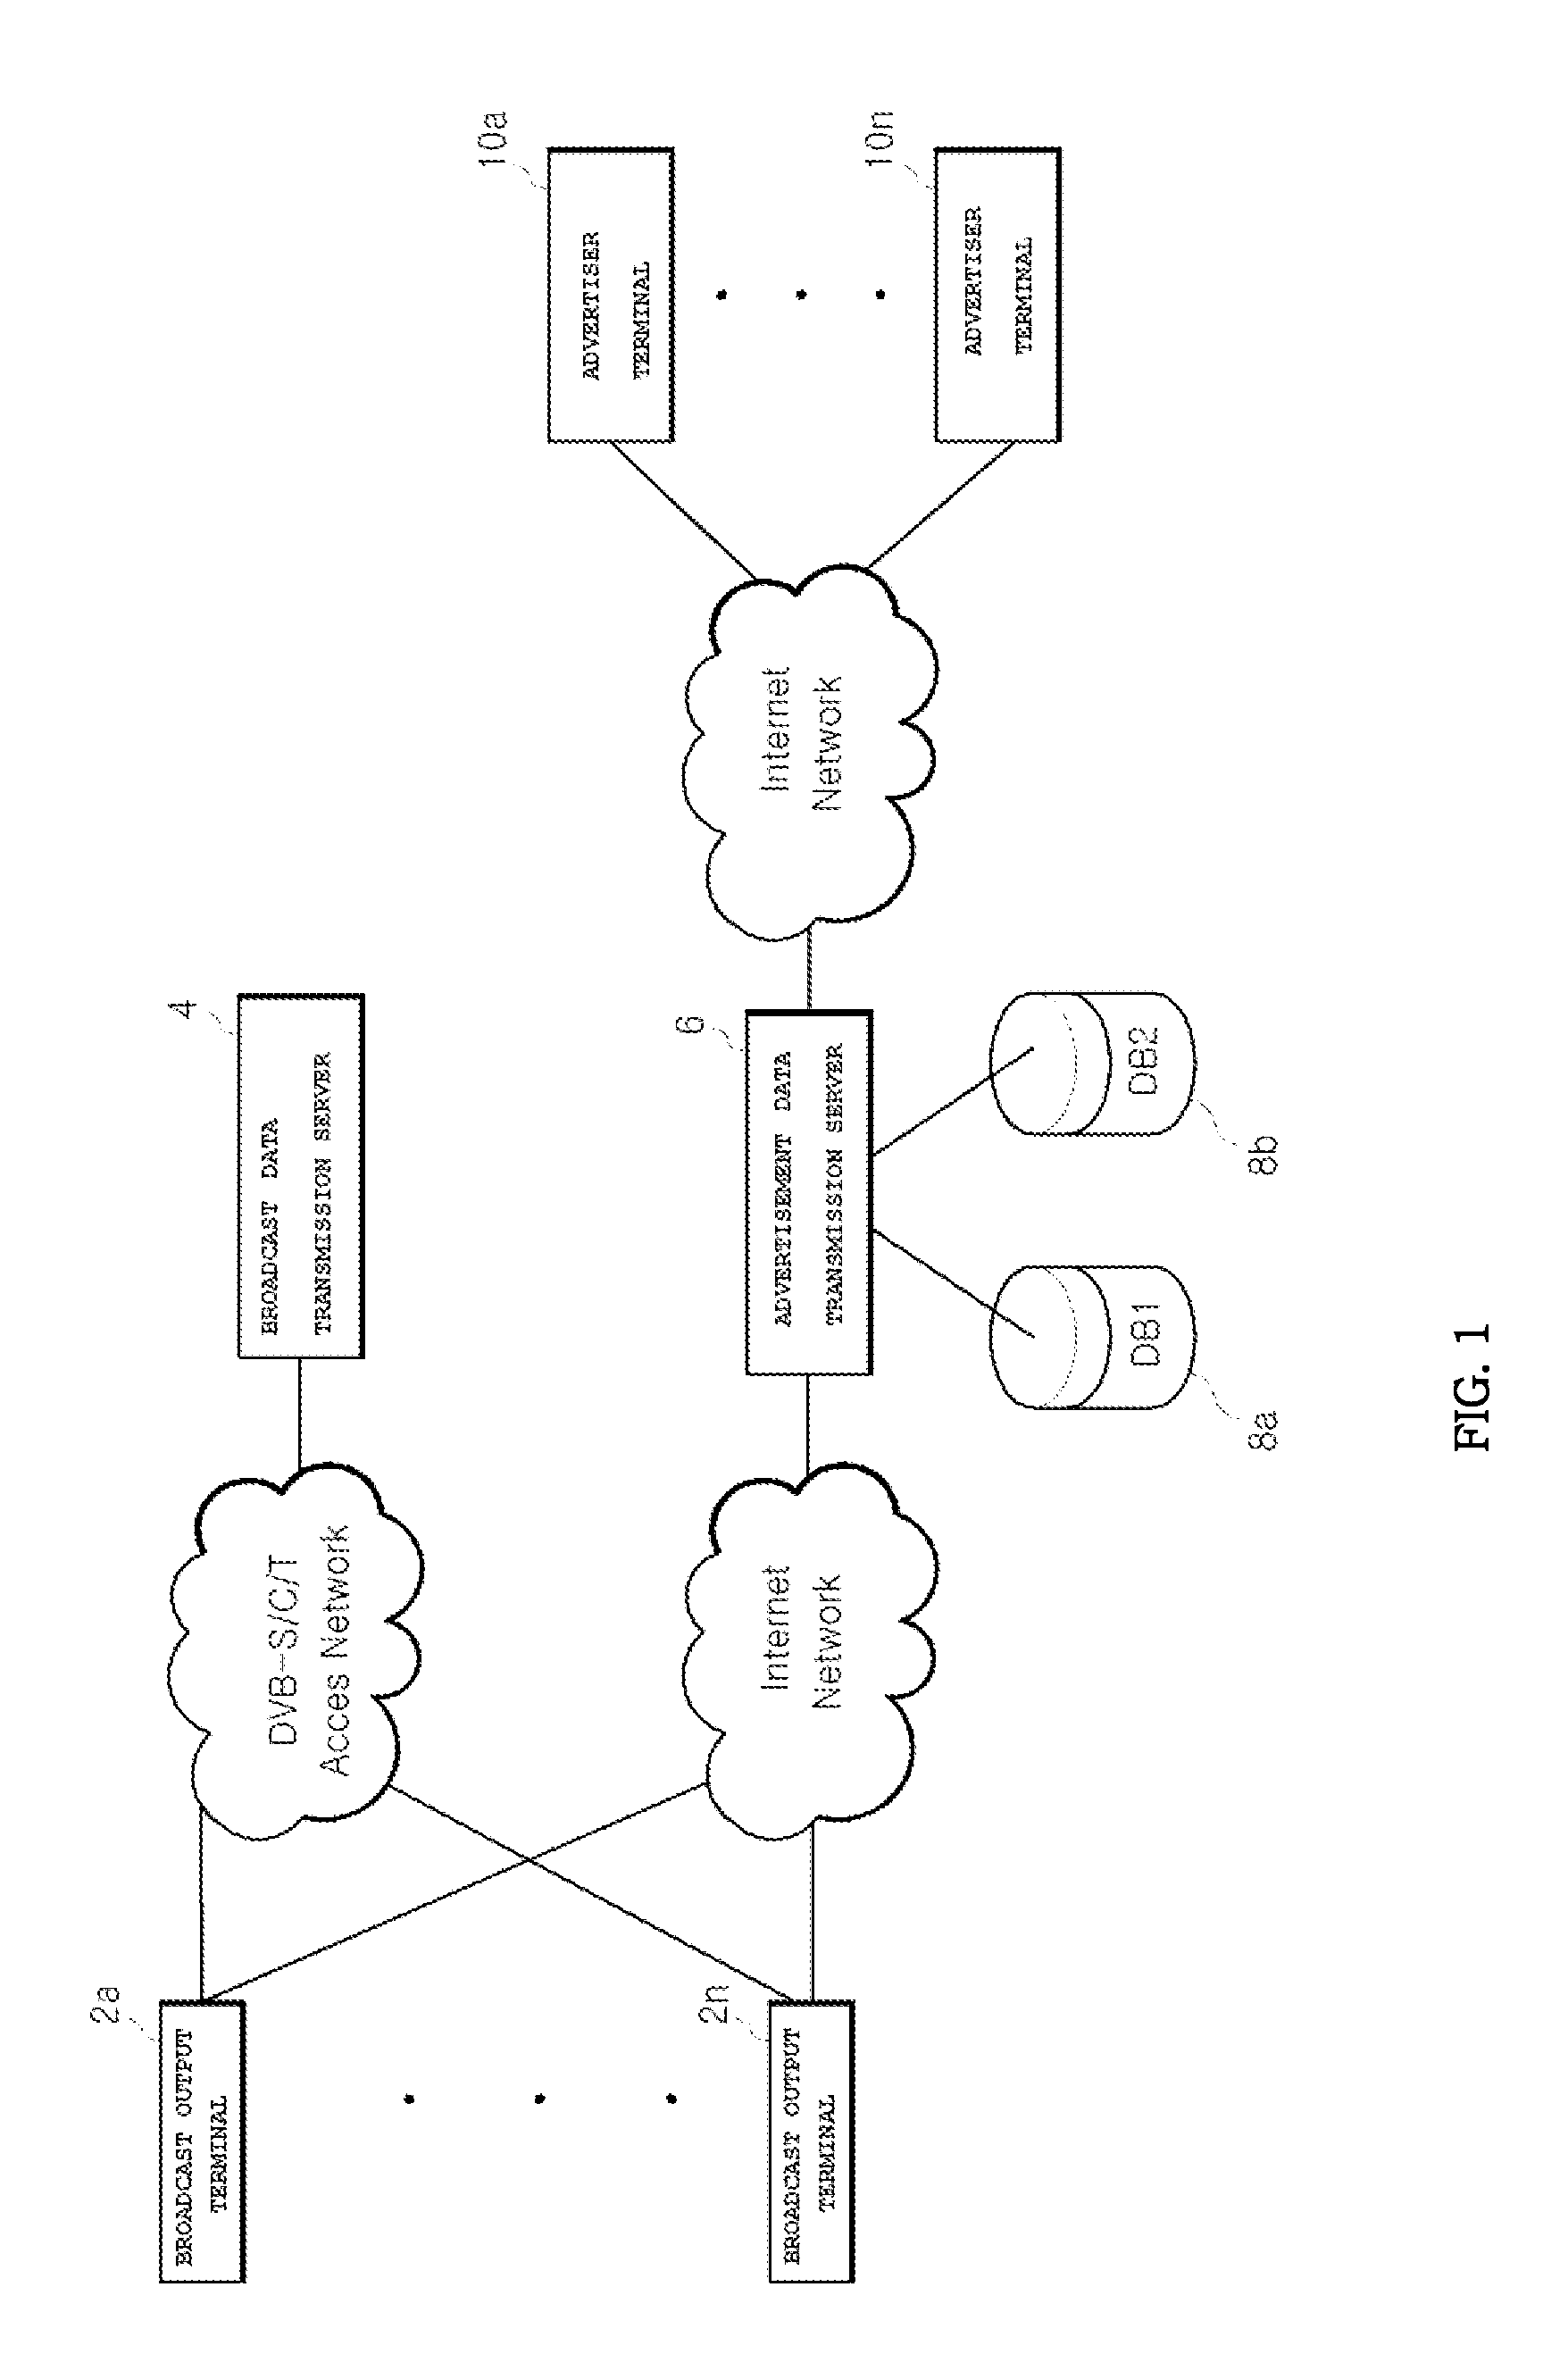 System for controlling automatic exposure of broadcast advertisement data and method for same